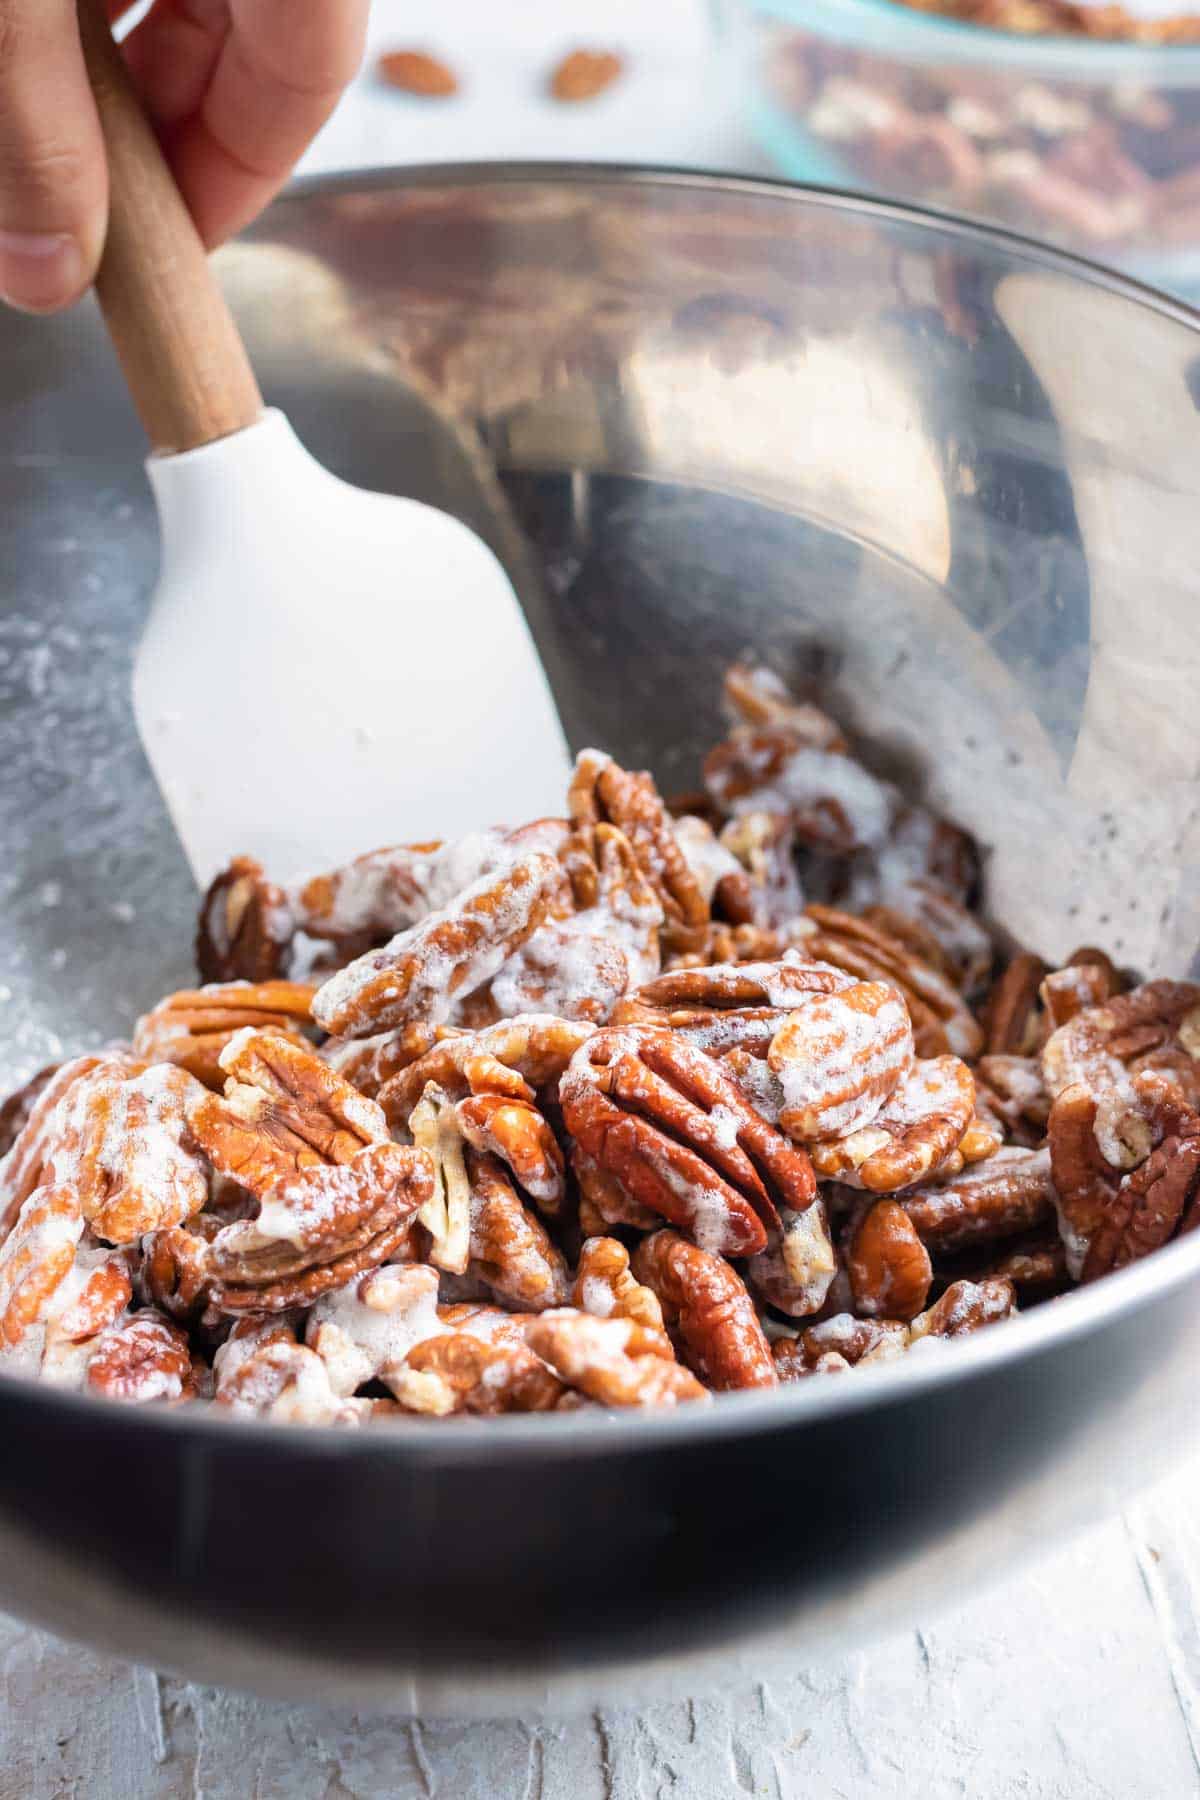 Pecans being tossed in a foamy egg white.